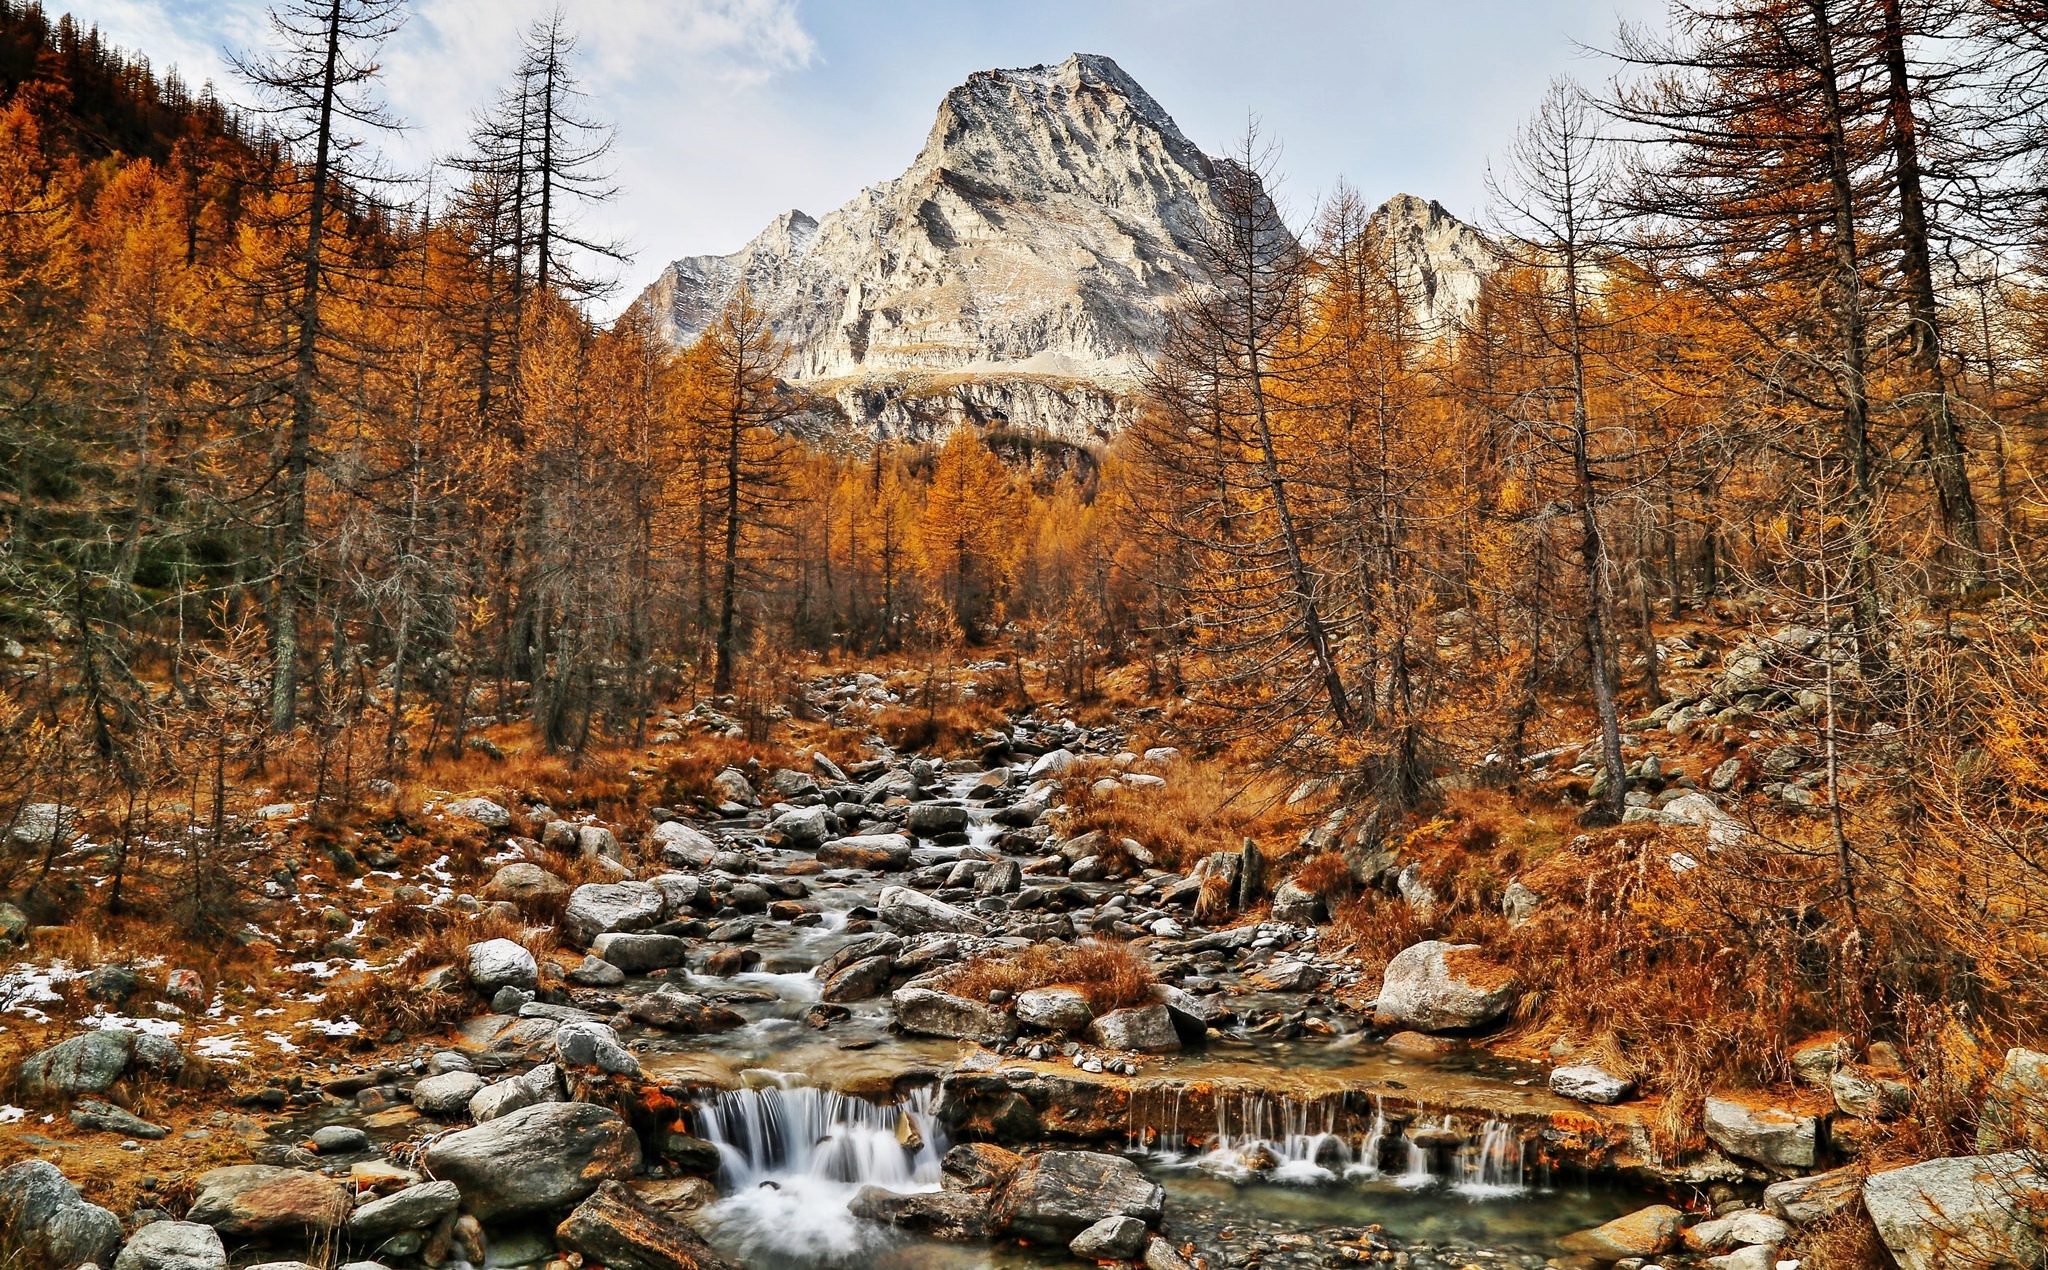 General 2048x1270 fall trees nature mountains landscape